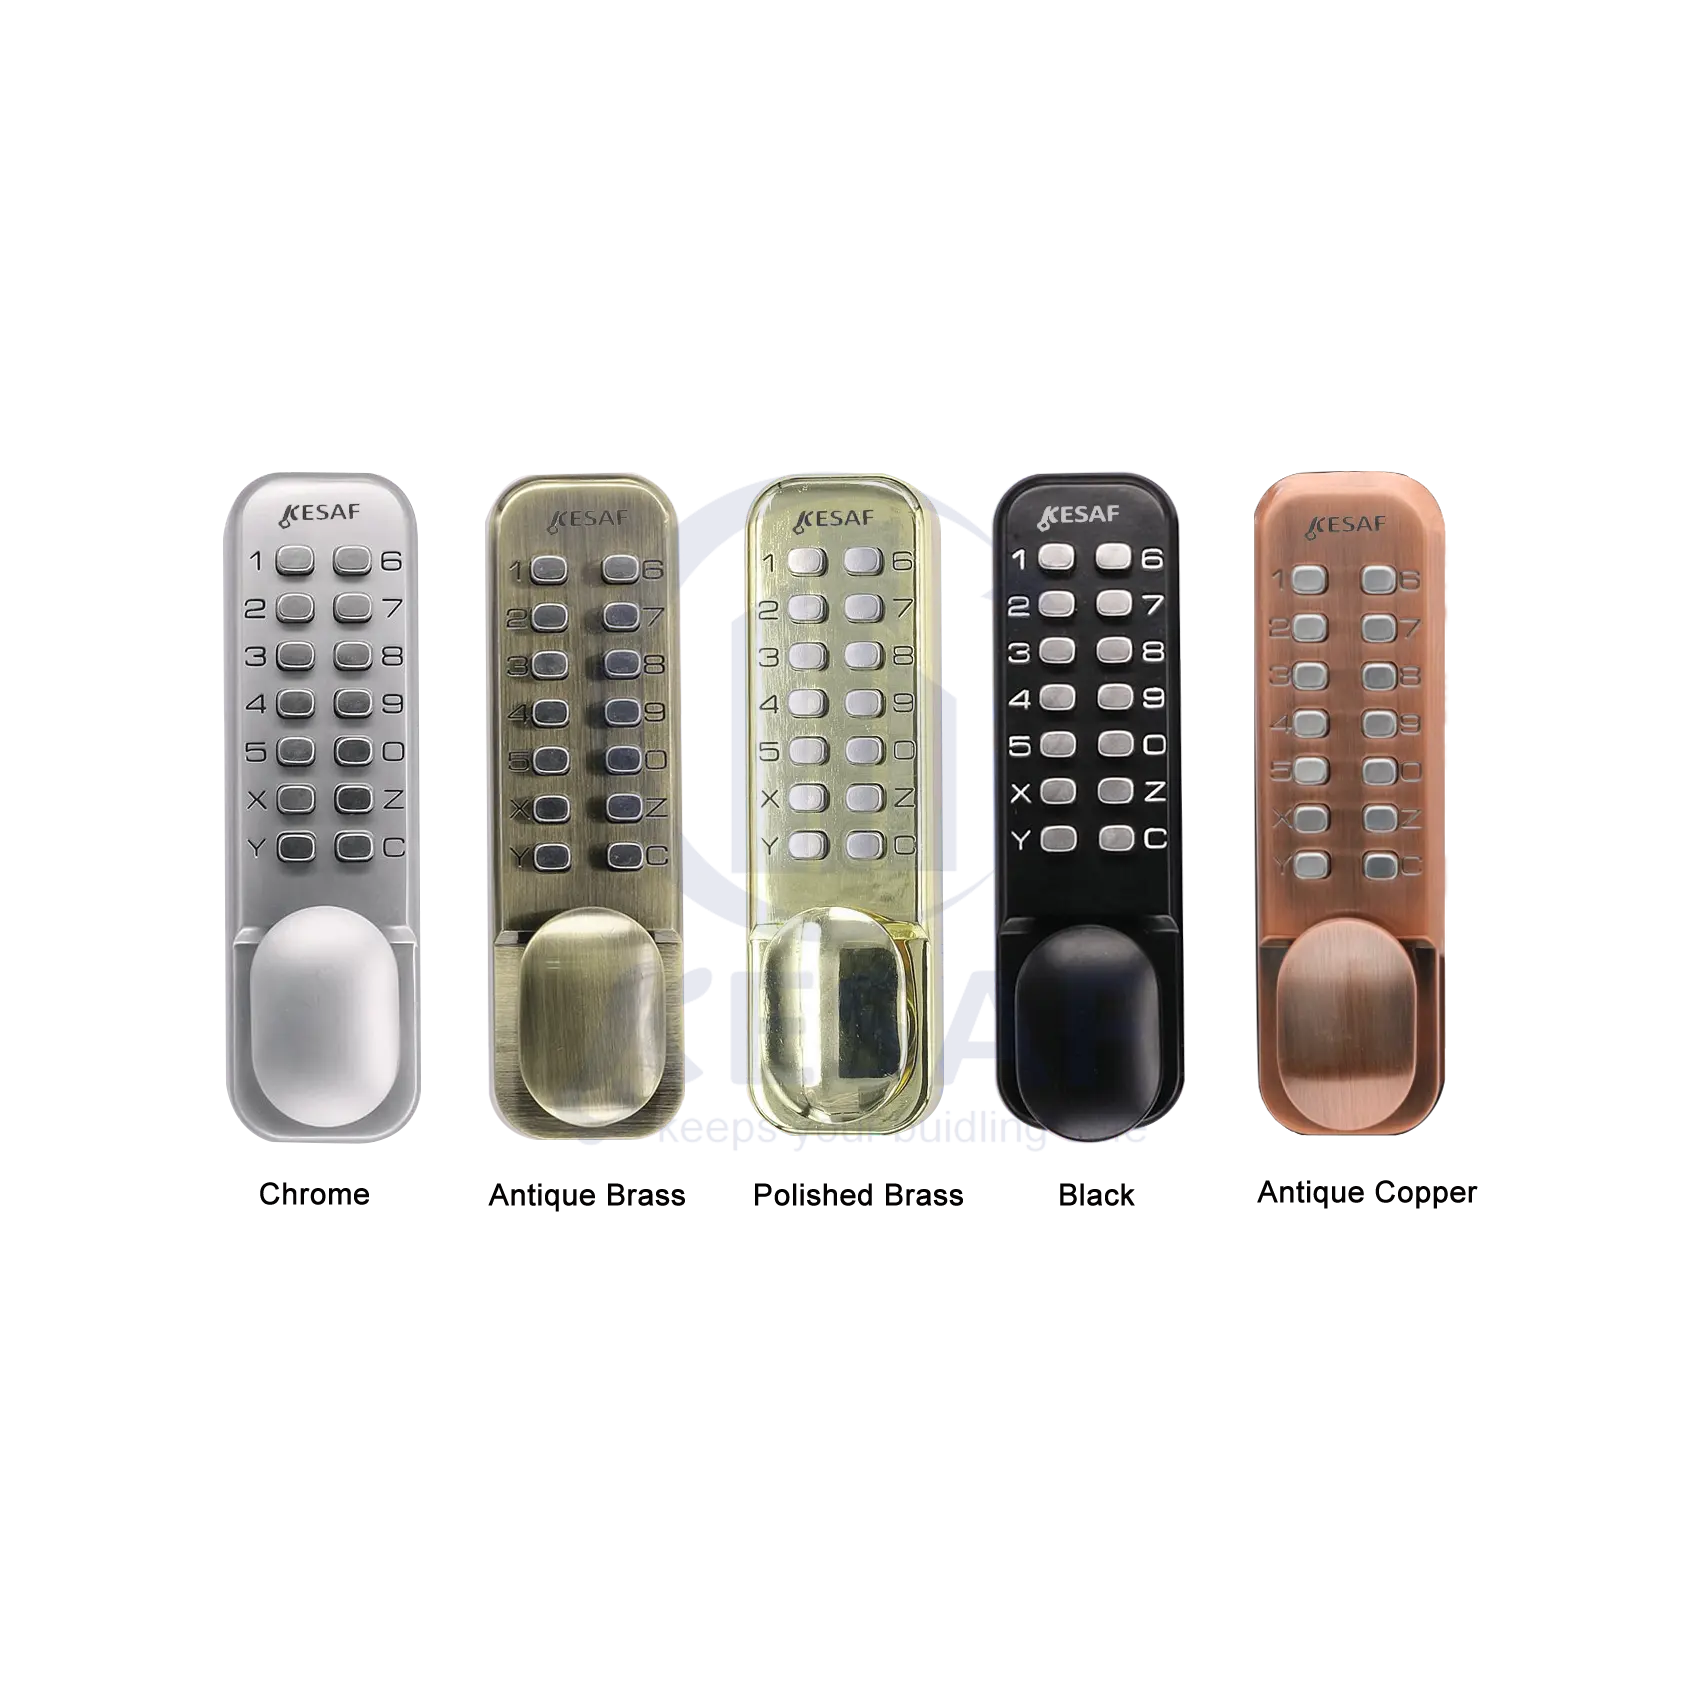 KESAF Factory Best High Security Zinc Alloy All Types Of Password Tongue Button Mechanical Door Locks For Home